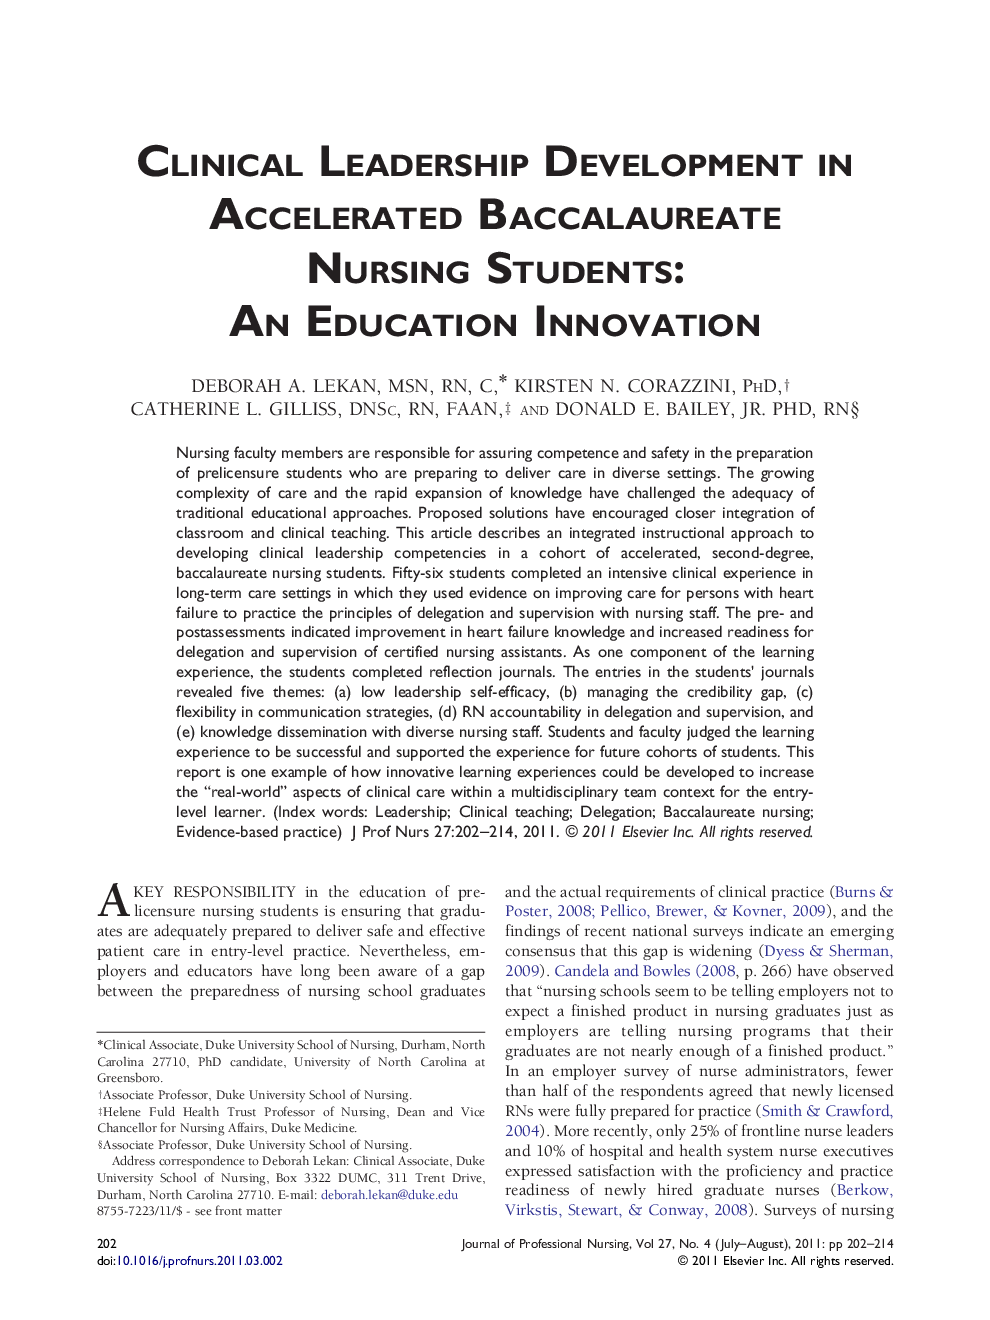 Clinical Leadership Development in Accelerated Baccalaureate Nursing Students: An Education Innovation